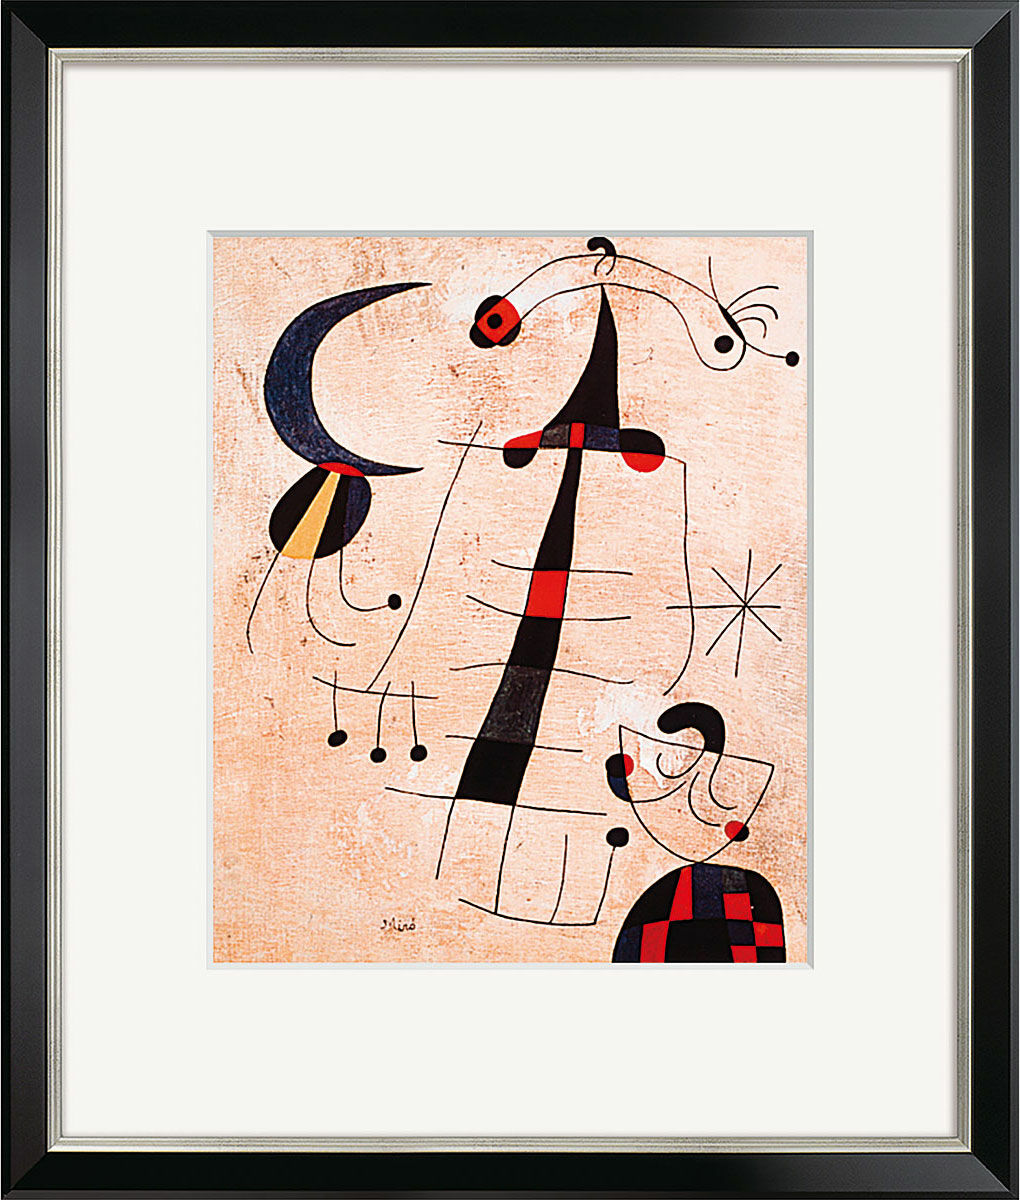 Picture "Lament of the Lovers", framed by Joan Miró